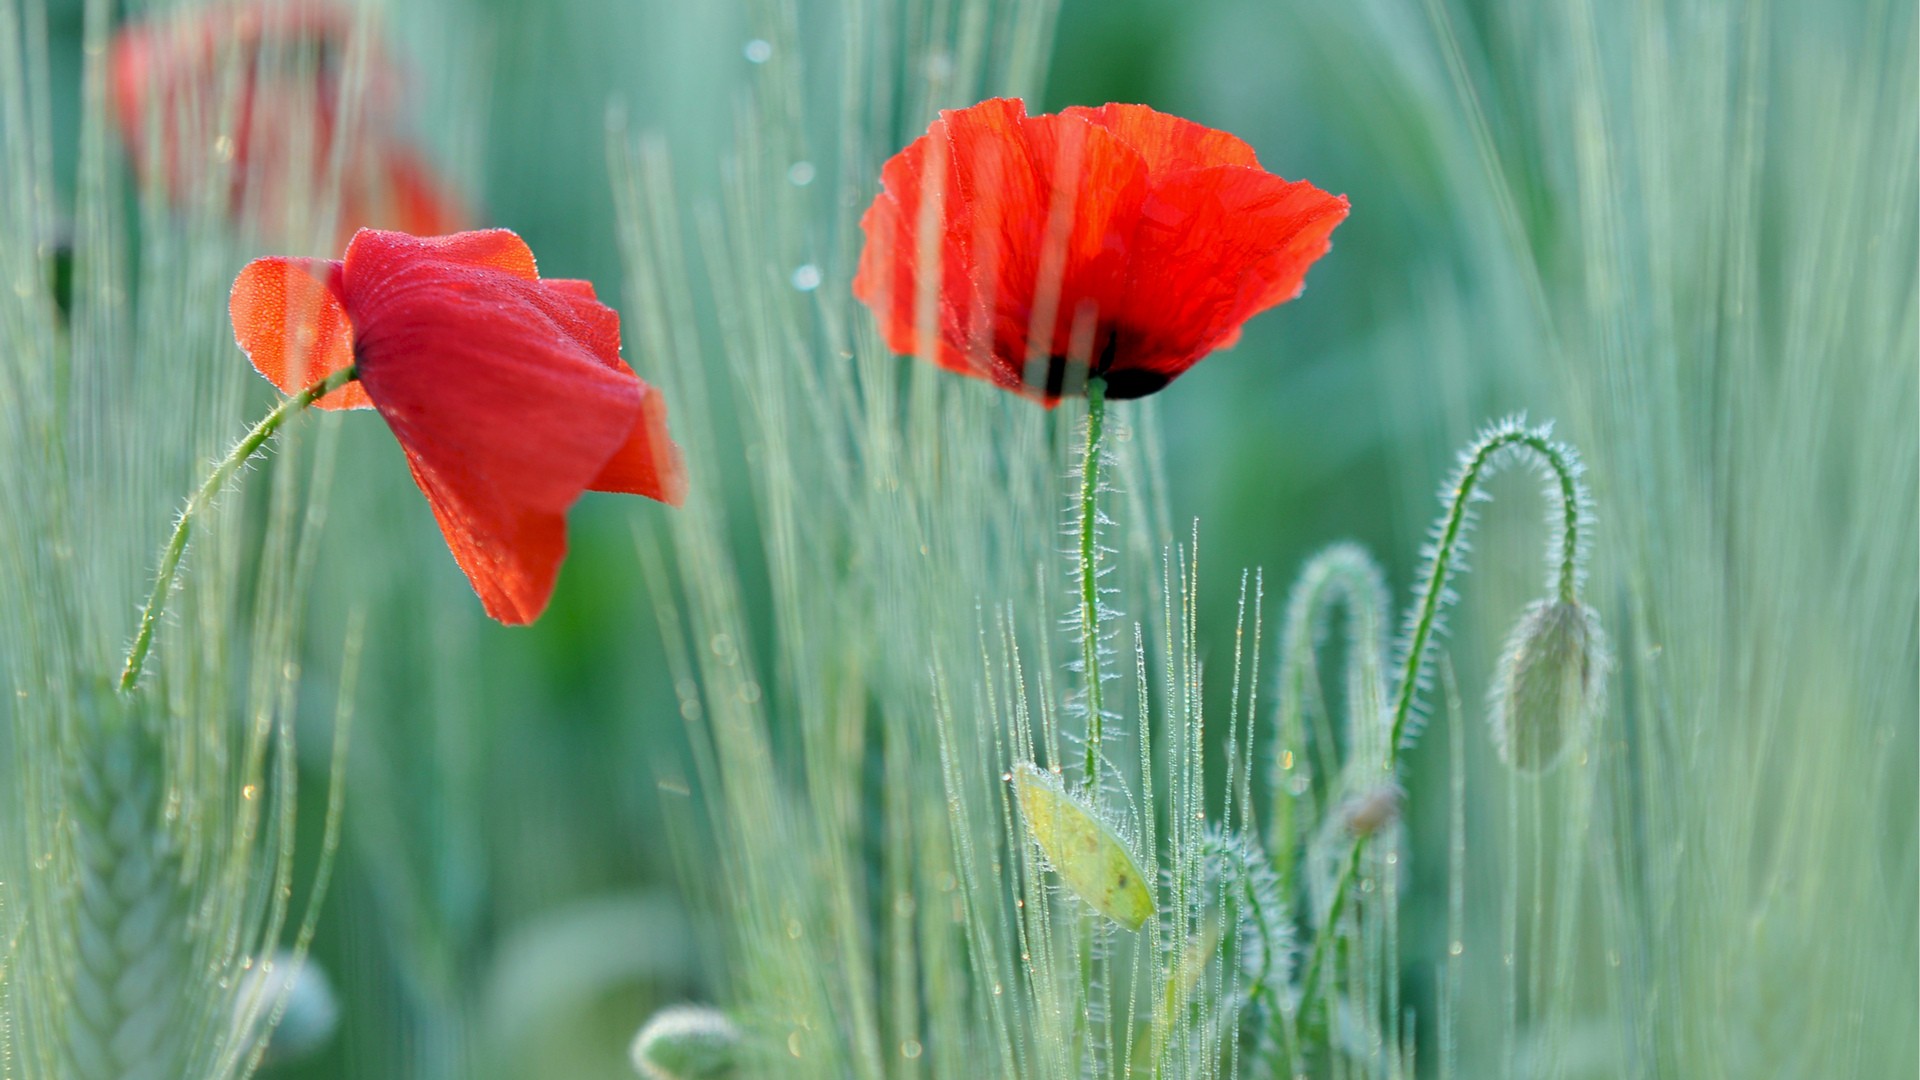 General 1920x1080 flowers poppies red flowers plants